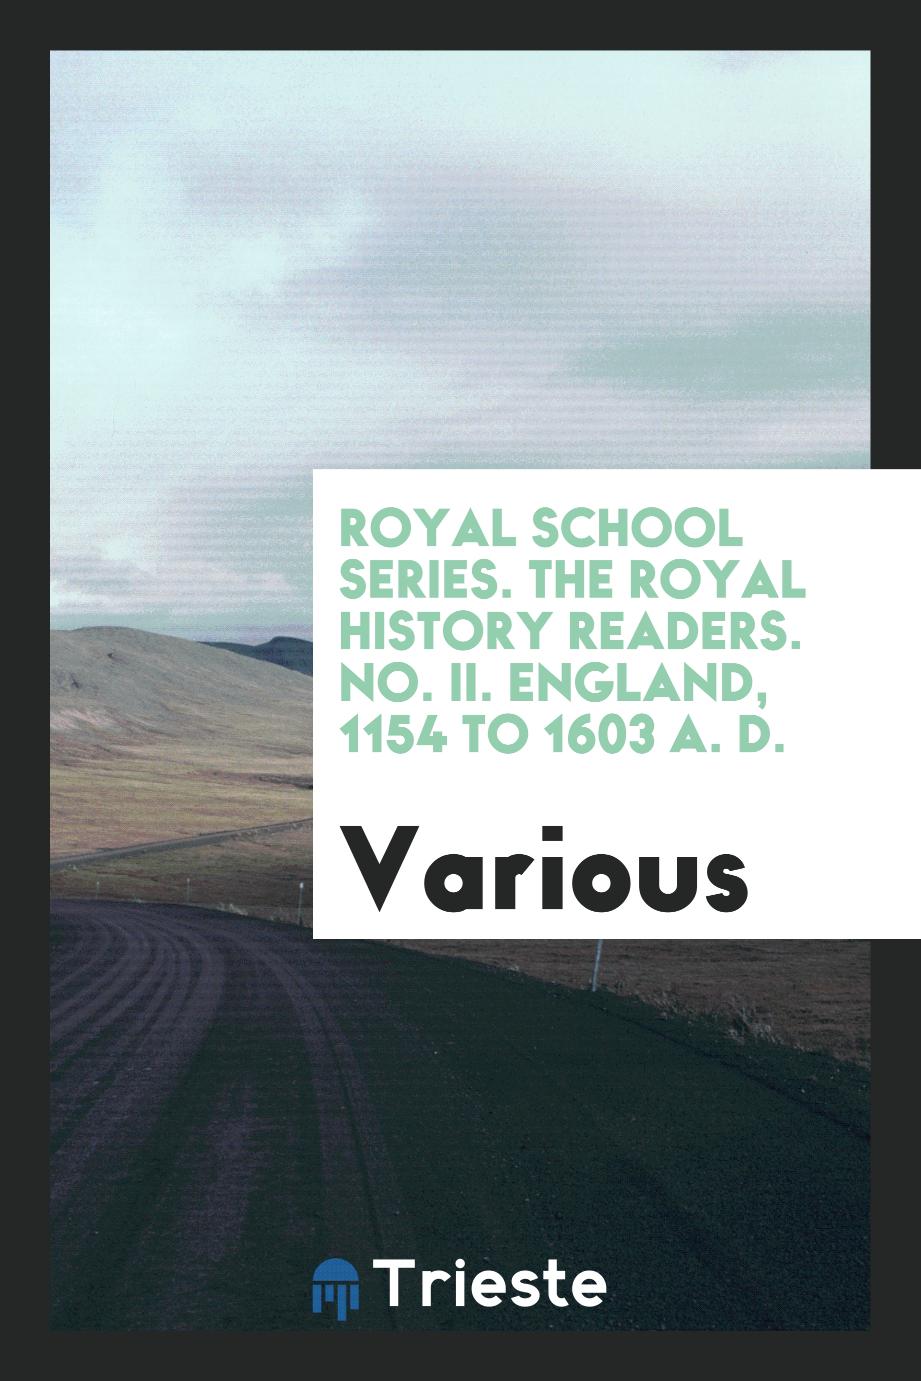 Royal School Series. The Royal History Readers. No. II. England, 1154 to 1603 A. D.